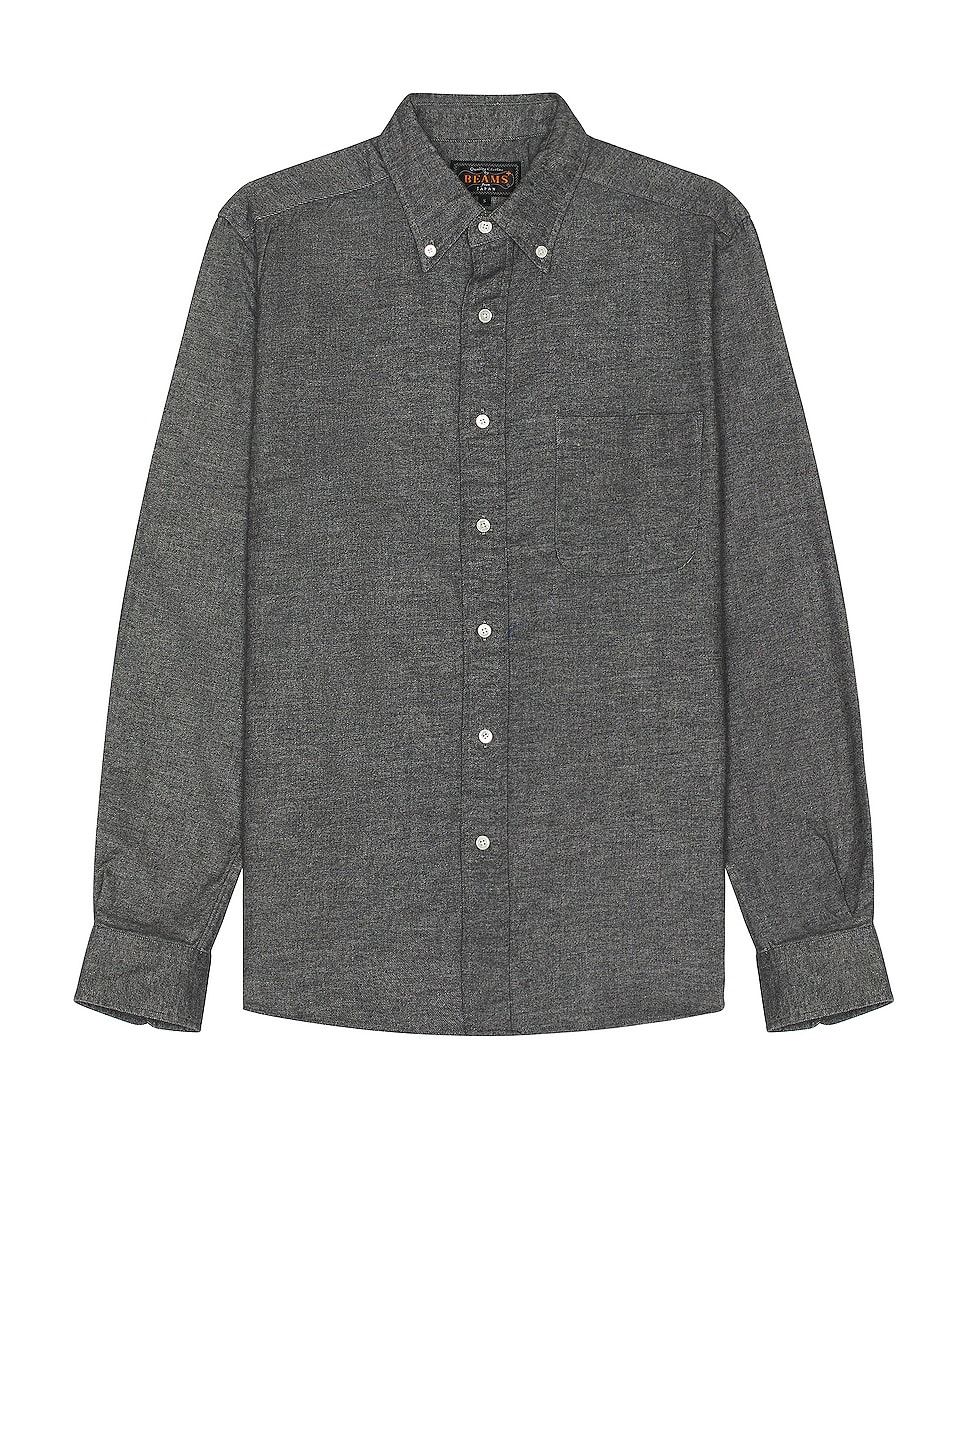 Image 1 of Beams Plus B.d. Flannel Solid Shirt in Grey